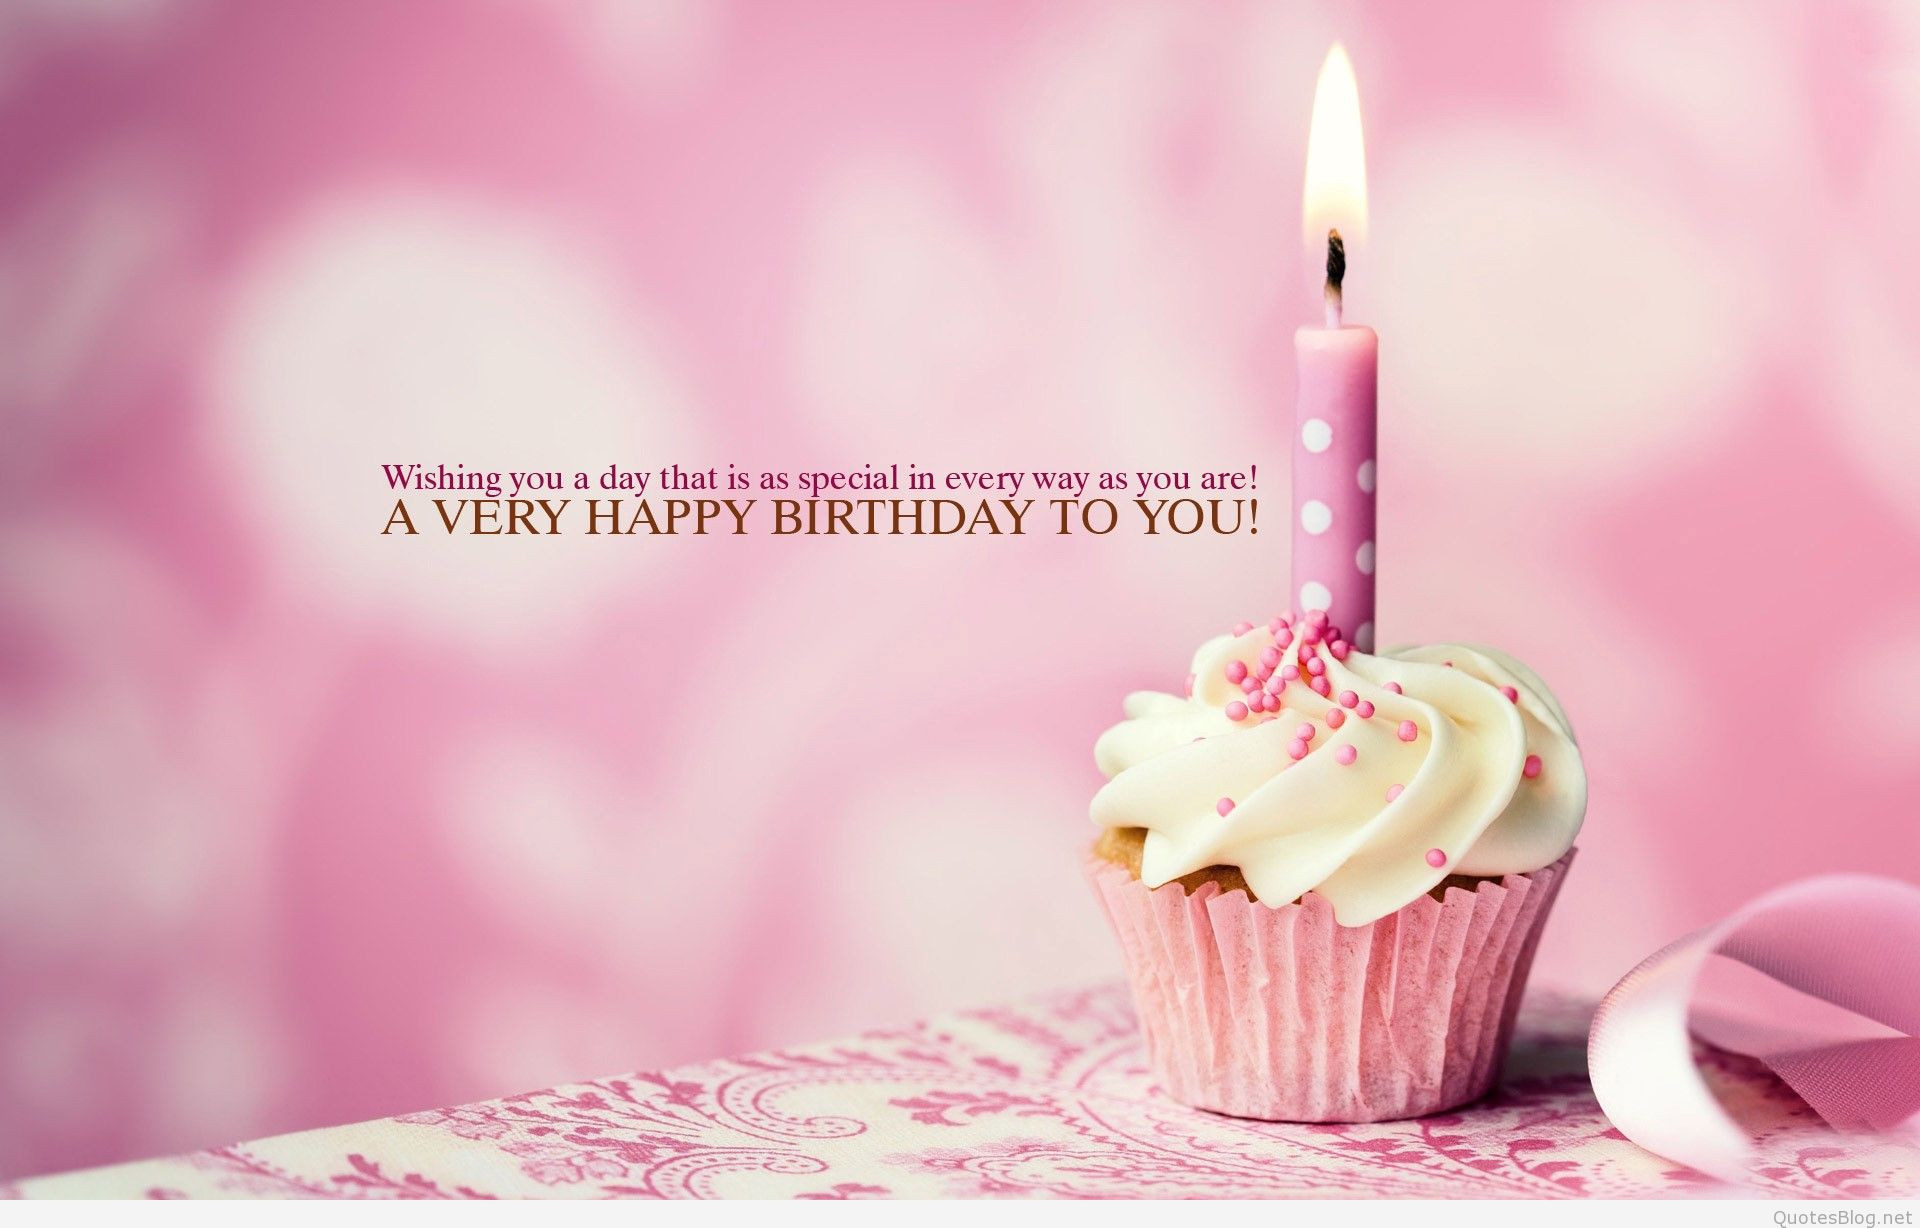 Happy Birthday Quote
 2015 Happy birthday quotes and sayings on images